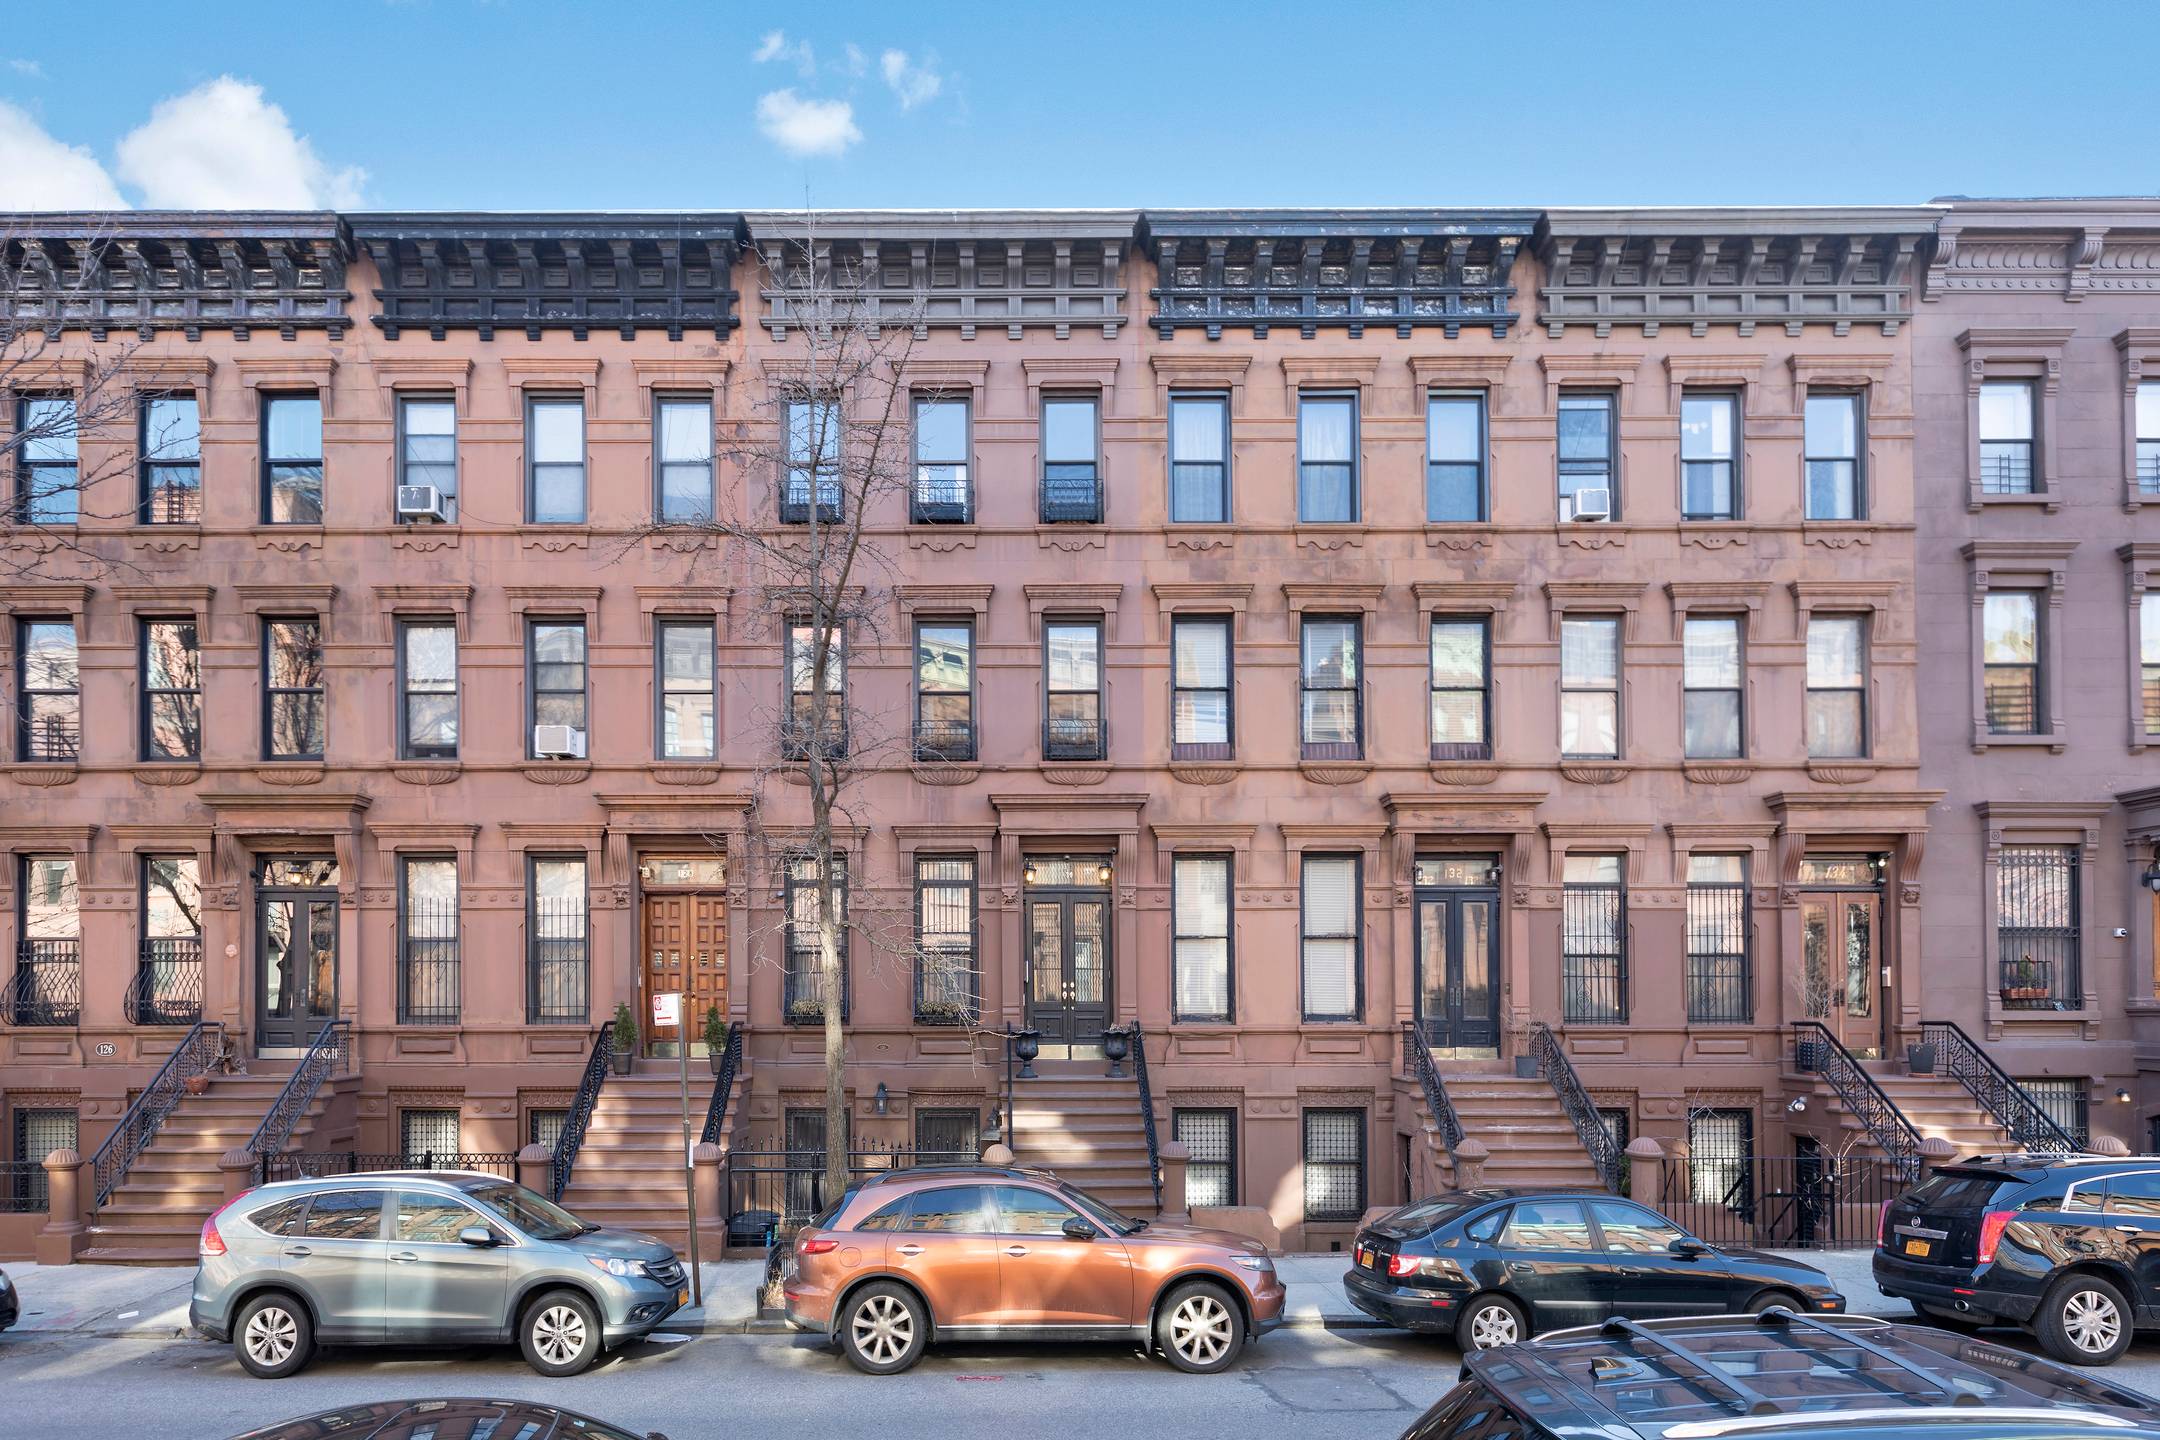 NEW TO MARKET! GREAT INVESTMENT OPPORTUNITY IN A GREAT LOCATION ON A BEAUTIFUL HISTORICAL HARLEM BLOCK..STEPS FROM SUBWAY